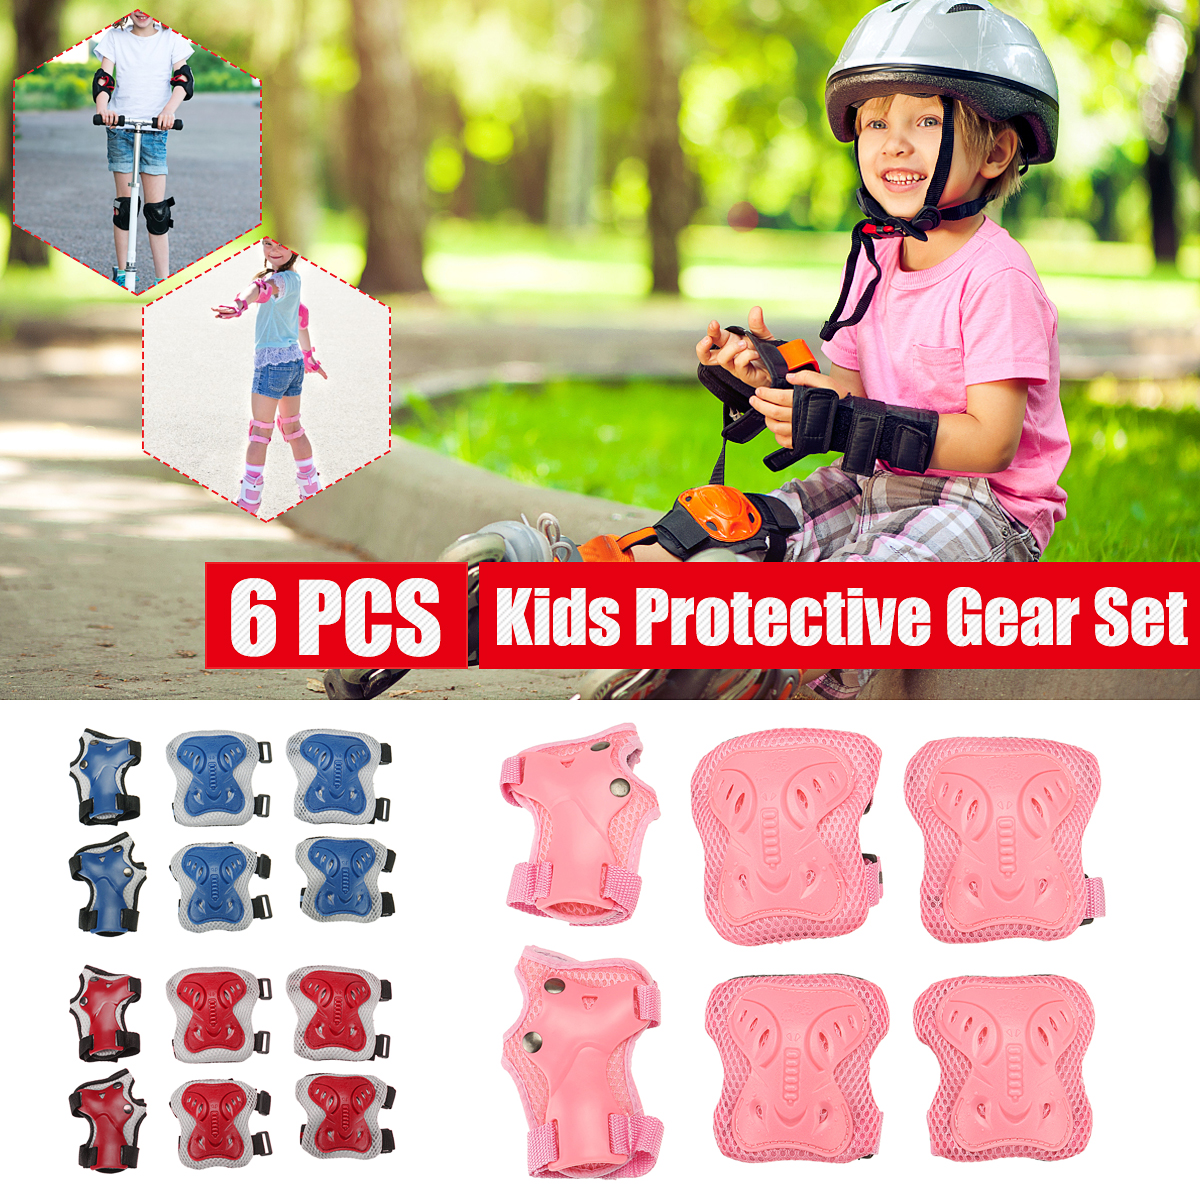 6PCS-Set-Adult-Children-KneeElbowWrist-Pads-Protective-Gears-for-Skateboard-Bicycle-Ice-Inline-Rolle-1796809